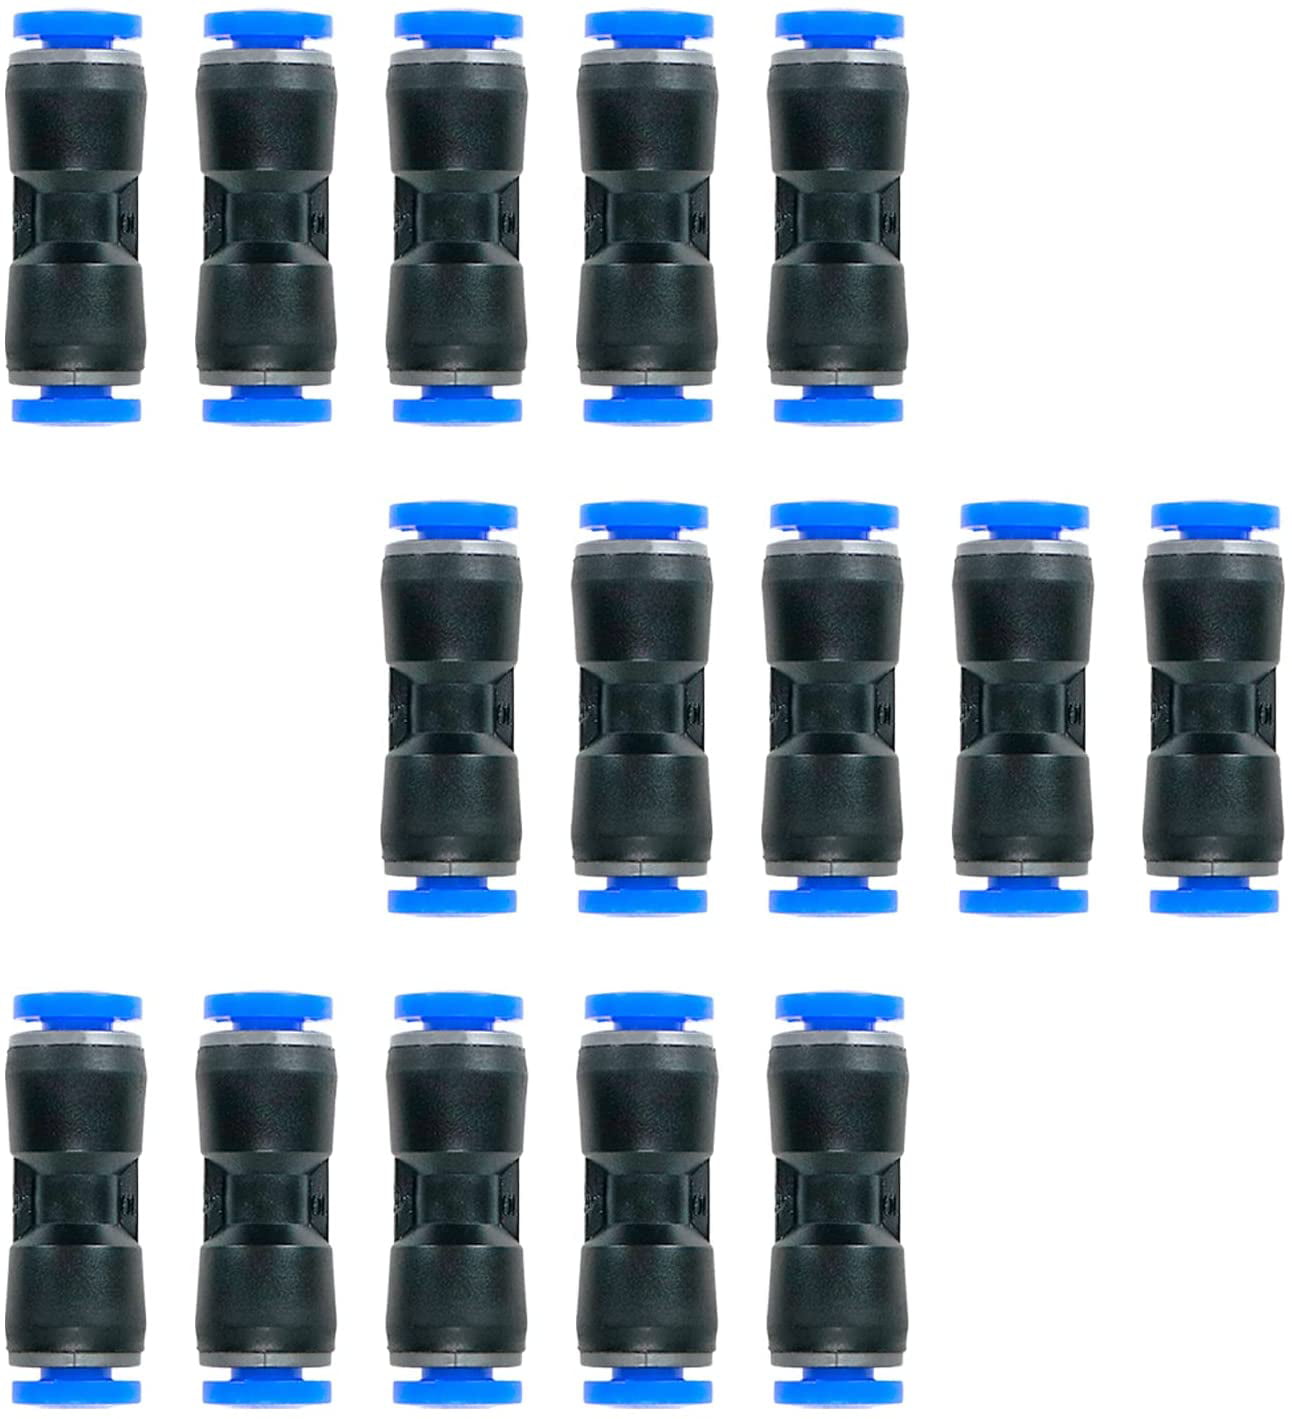 Plastic Push to Connect Fitting Tube Tee Connect 15 Pcs 1/4 Push Fittings Air 